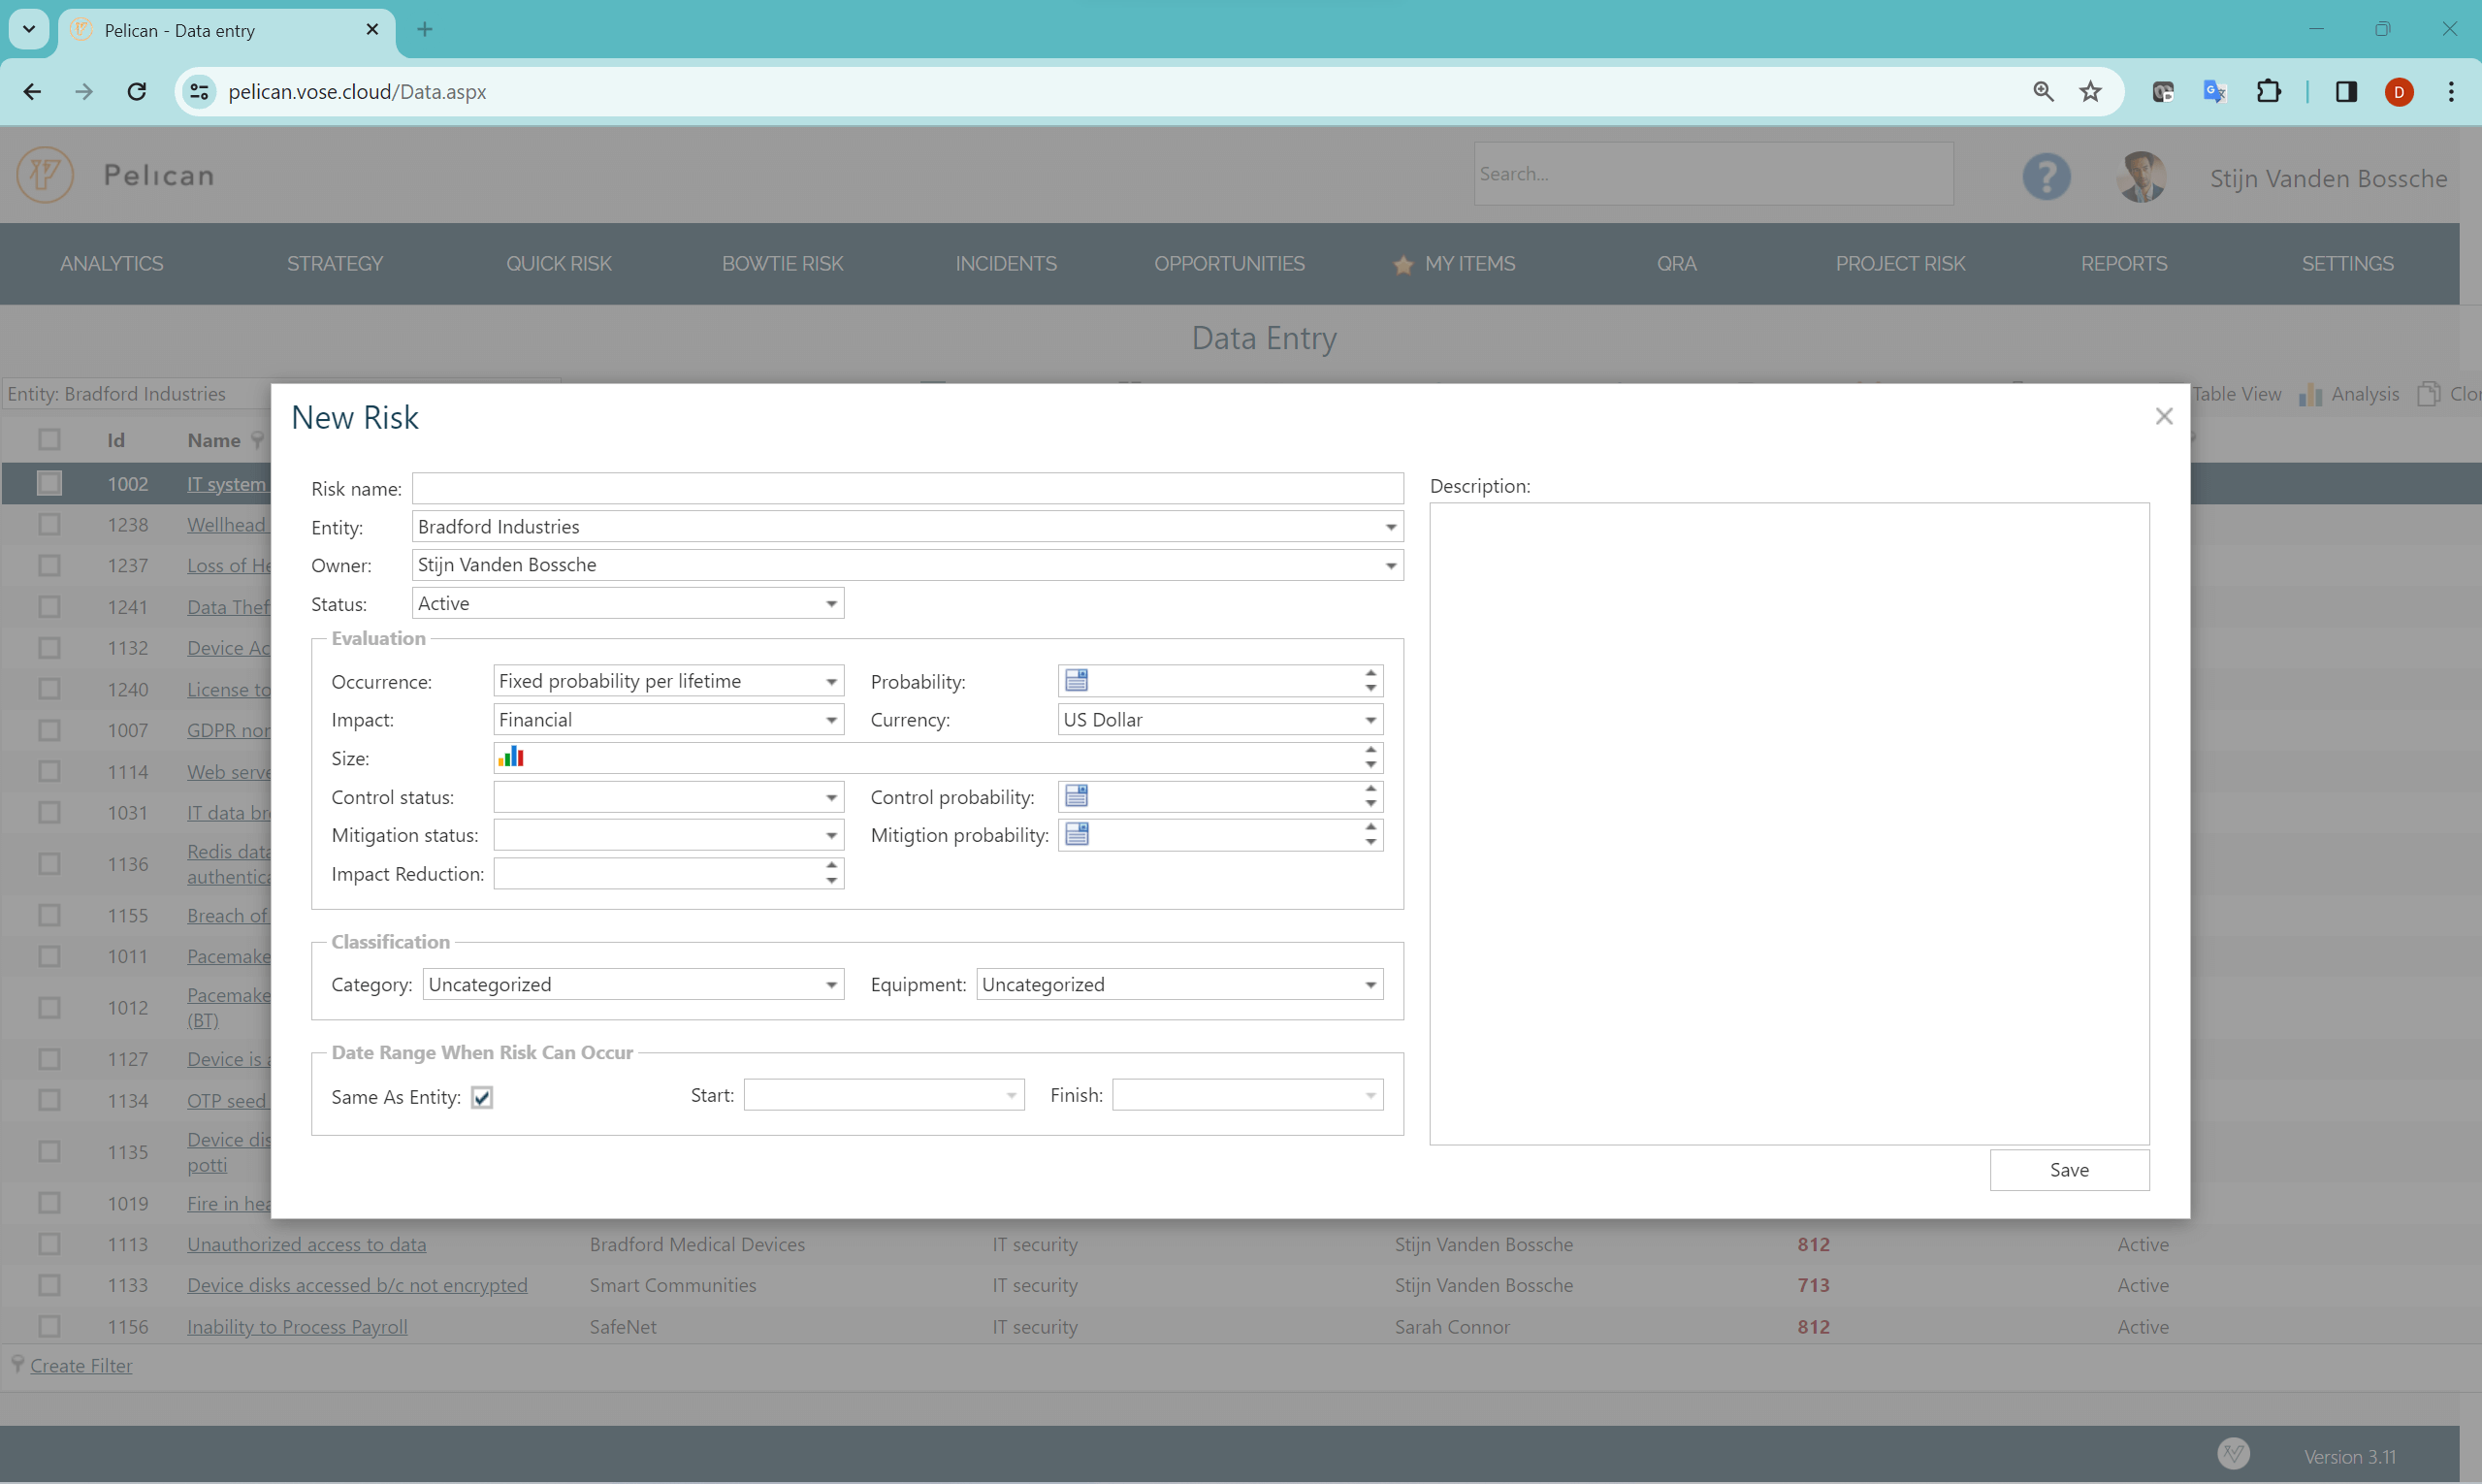 Data entry interface for the new risk